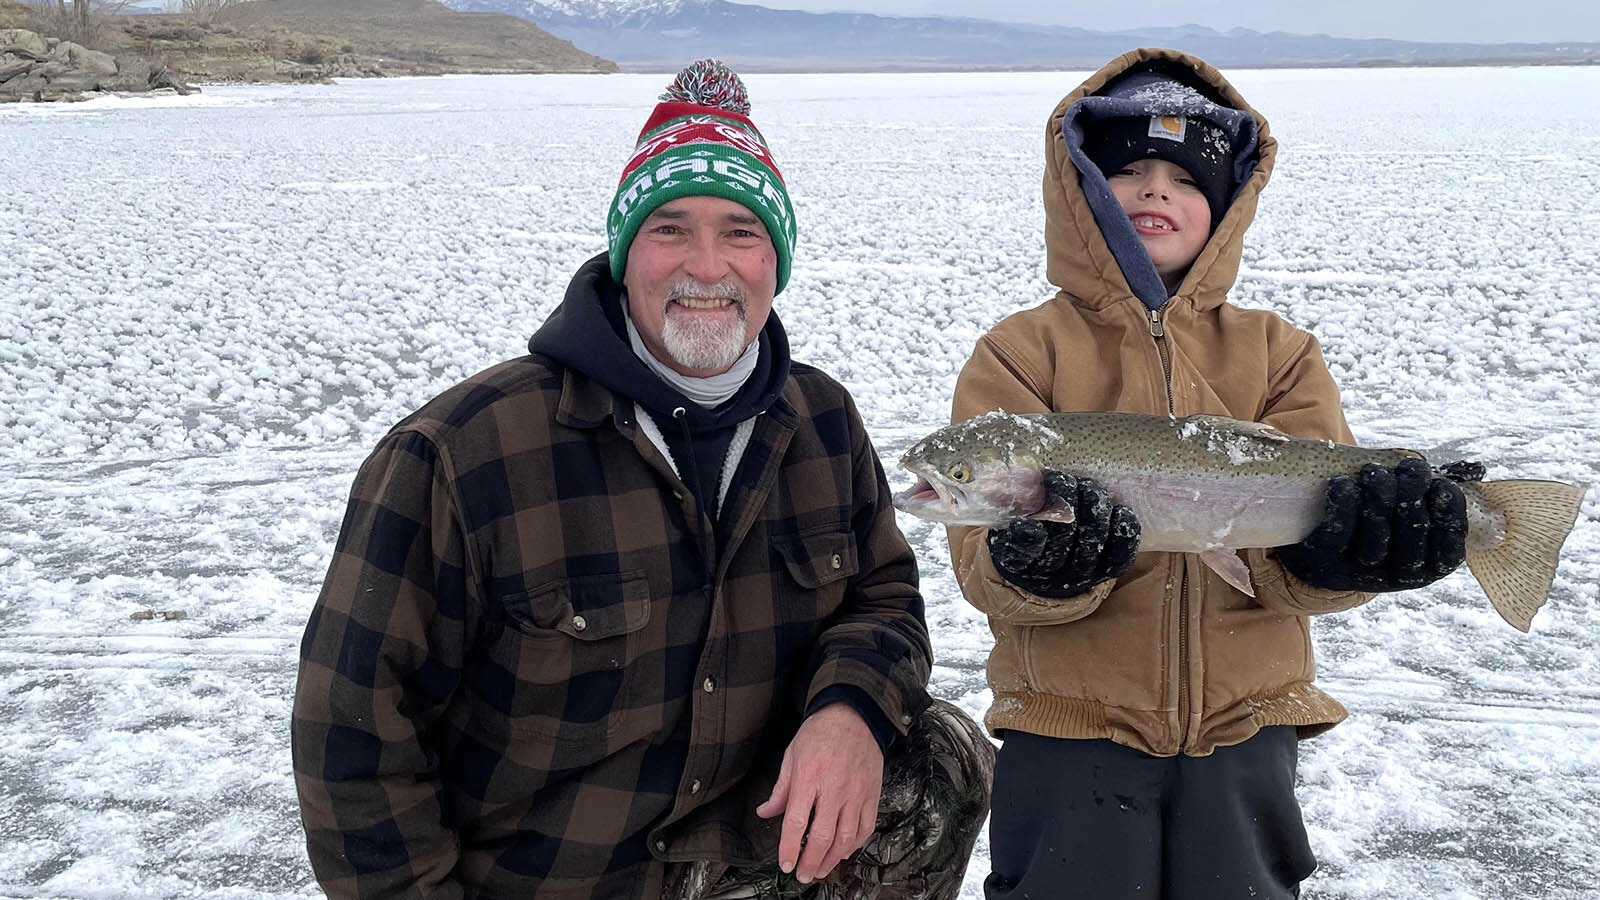 Ed Reish, left, and his grandson McCrae Puckett were all smiles catching fish through the ice on Boysen Reservoir with a field of frozen ice flowers littering the lake.